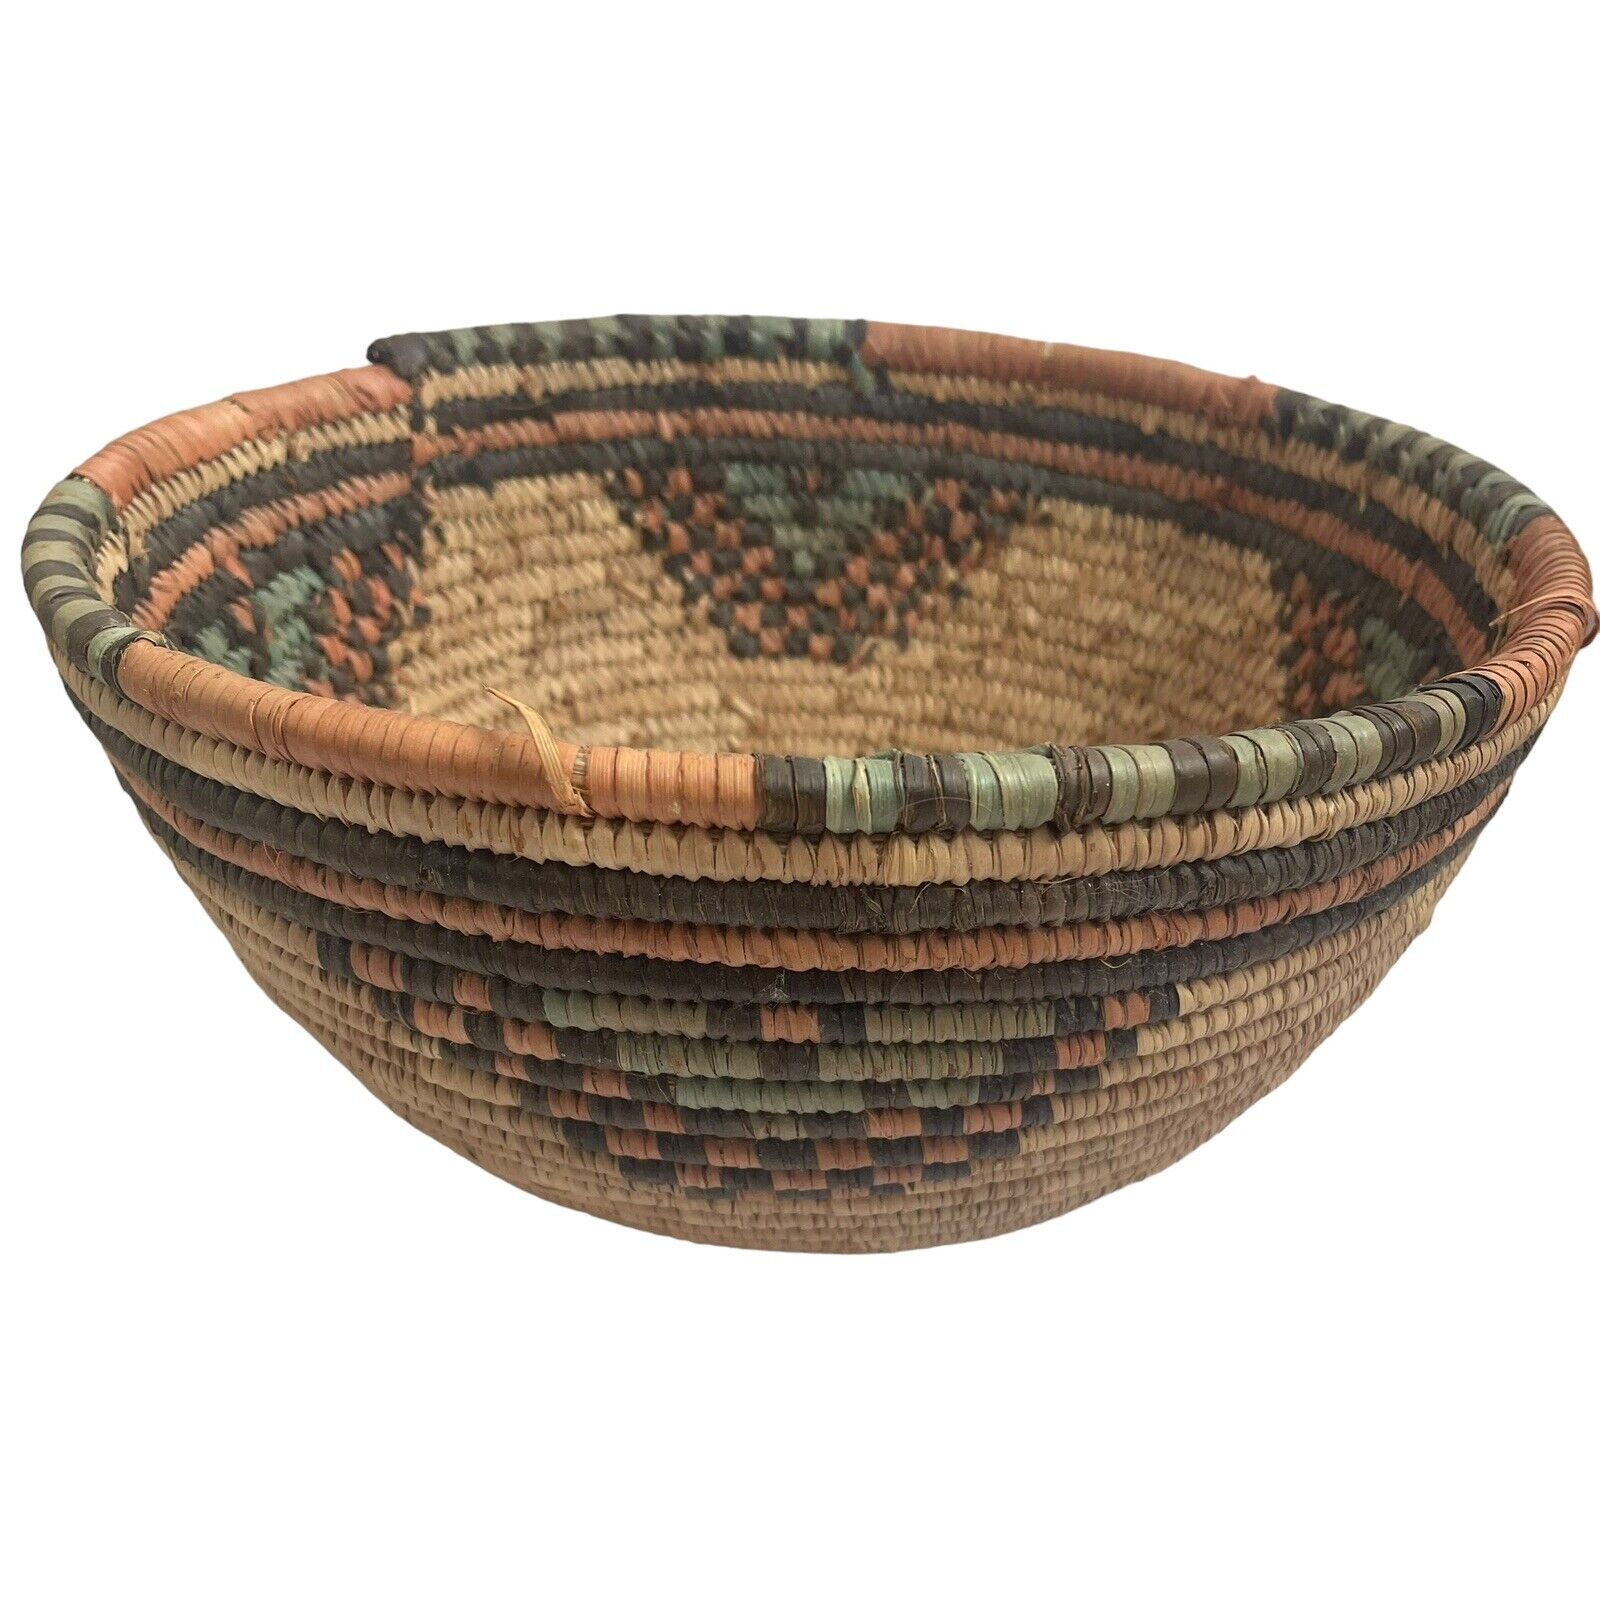 Nigerian Hausa Woven 11” Coiled Grass Bowl Basket Africa Red, Teal Green, Brown